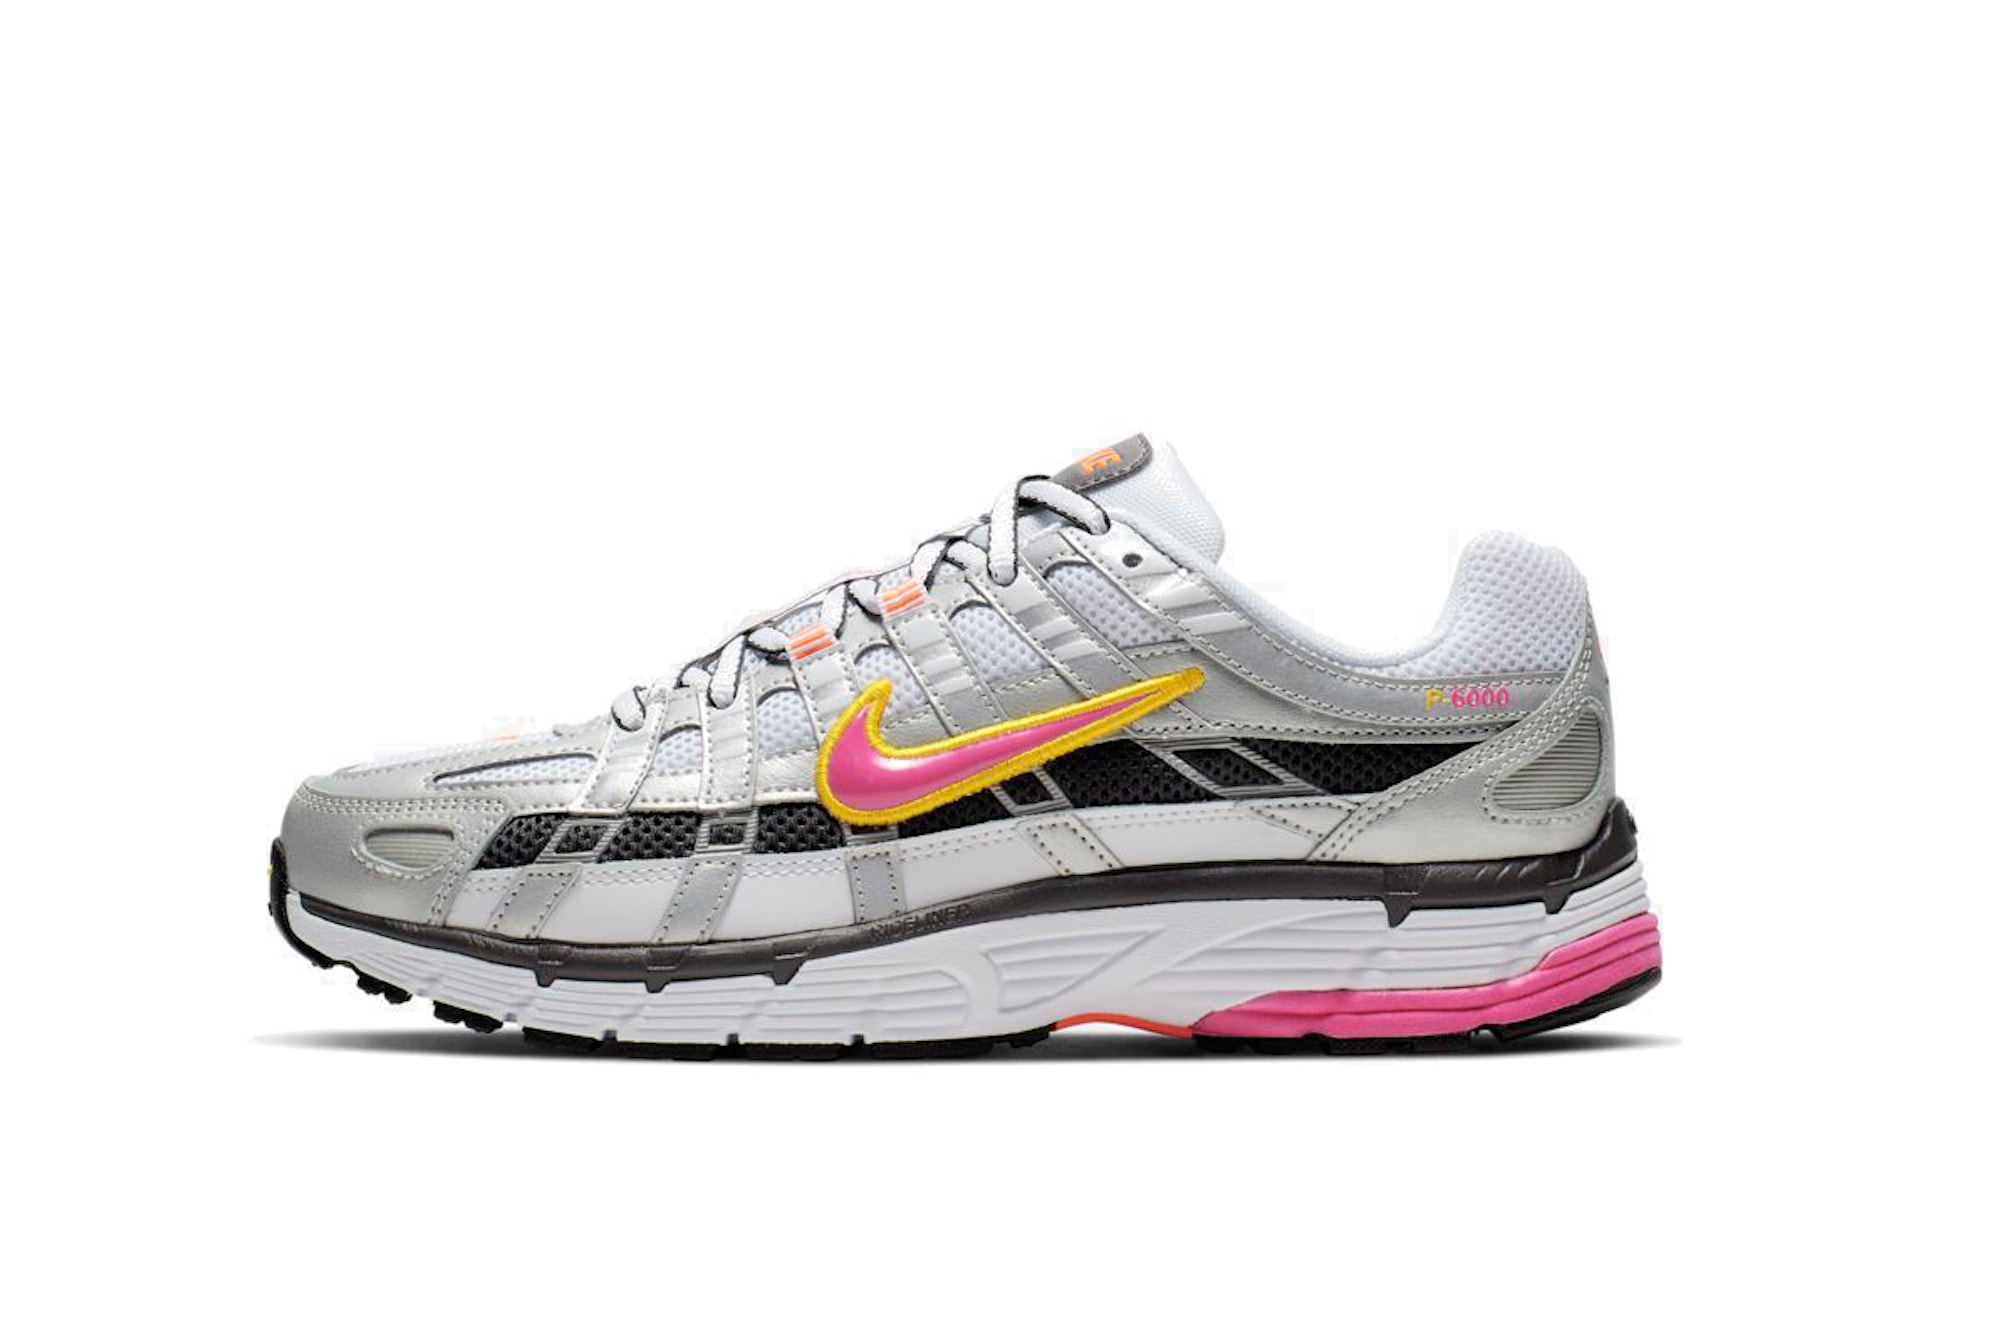 Nike P-6000 Fuchsia Pink and Navy Blue White Grey Dad Shoe Sneaker Trainer Chunky Retro Shoe